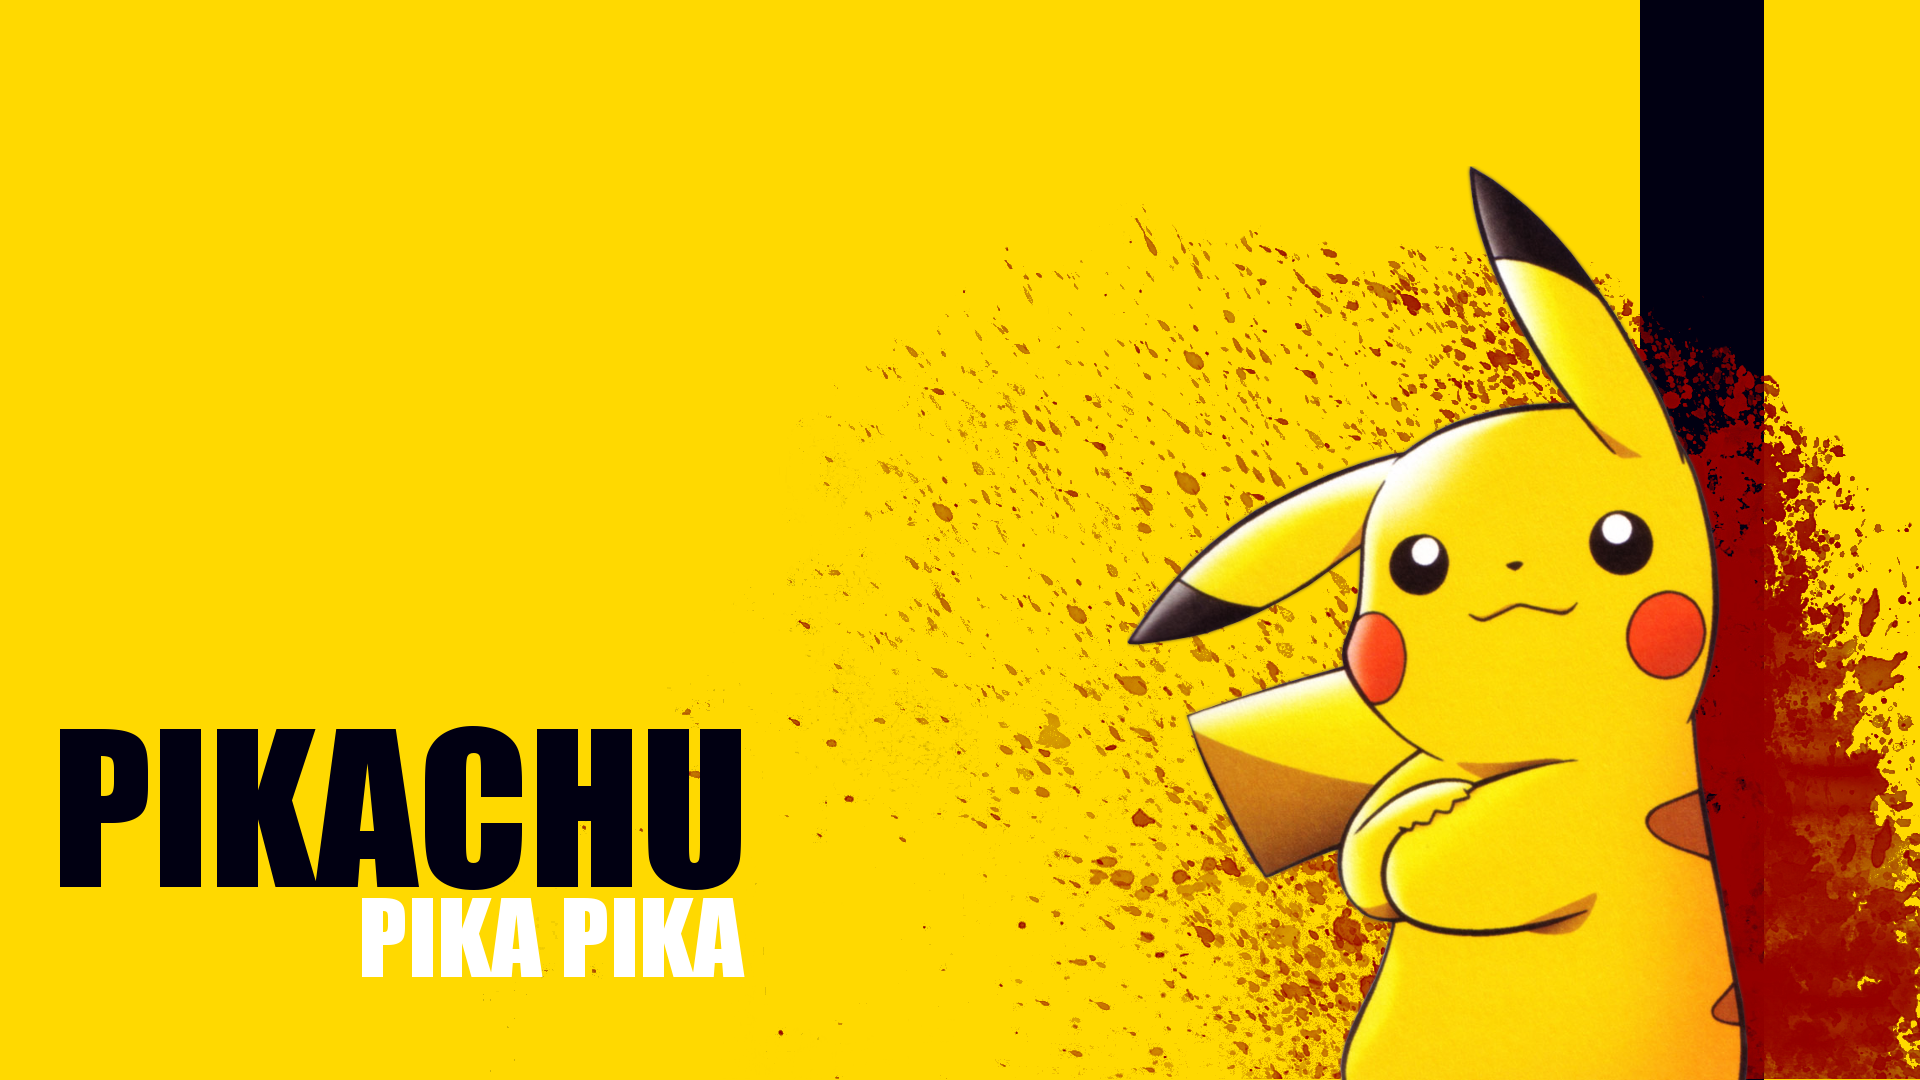 Free download Pikachu HD Wallpapers [1920x1080] for your Desktop, Mobile &  Tablet | Explore 99+ Pikachu HD Wallpapers | Pokemon Pikachu Wallpapers, Pikachu  Wallpaper, Pokemon Wallpaper Pikachu